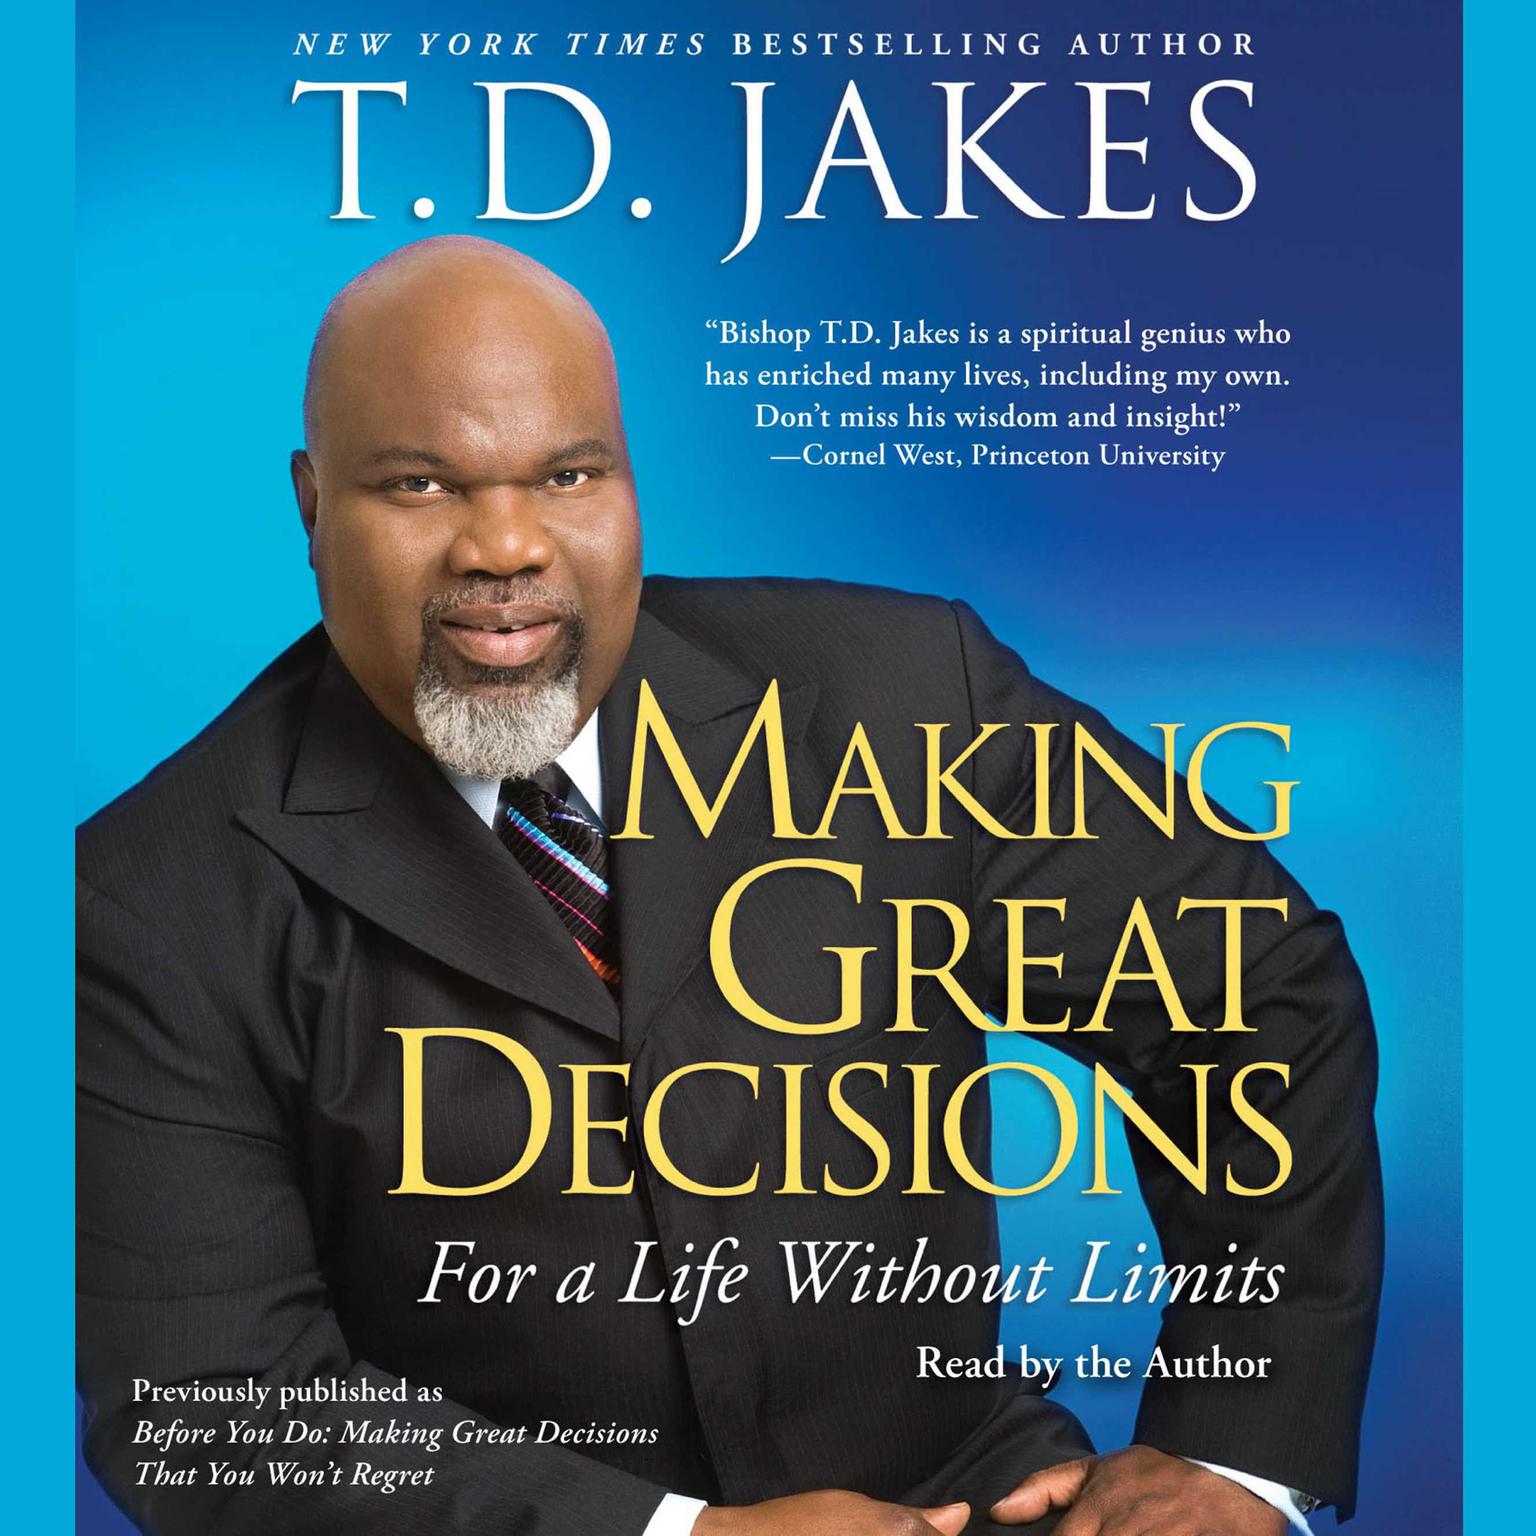 Making Great Decisions (Abridged): For a Life Without Limits Audiobook, by T. D. Jakes